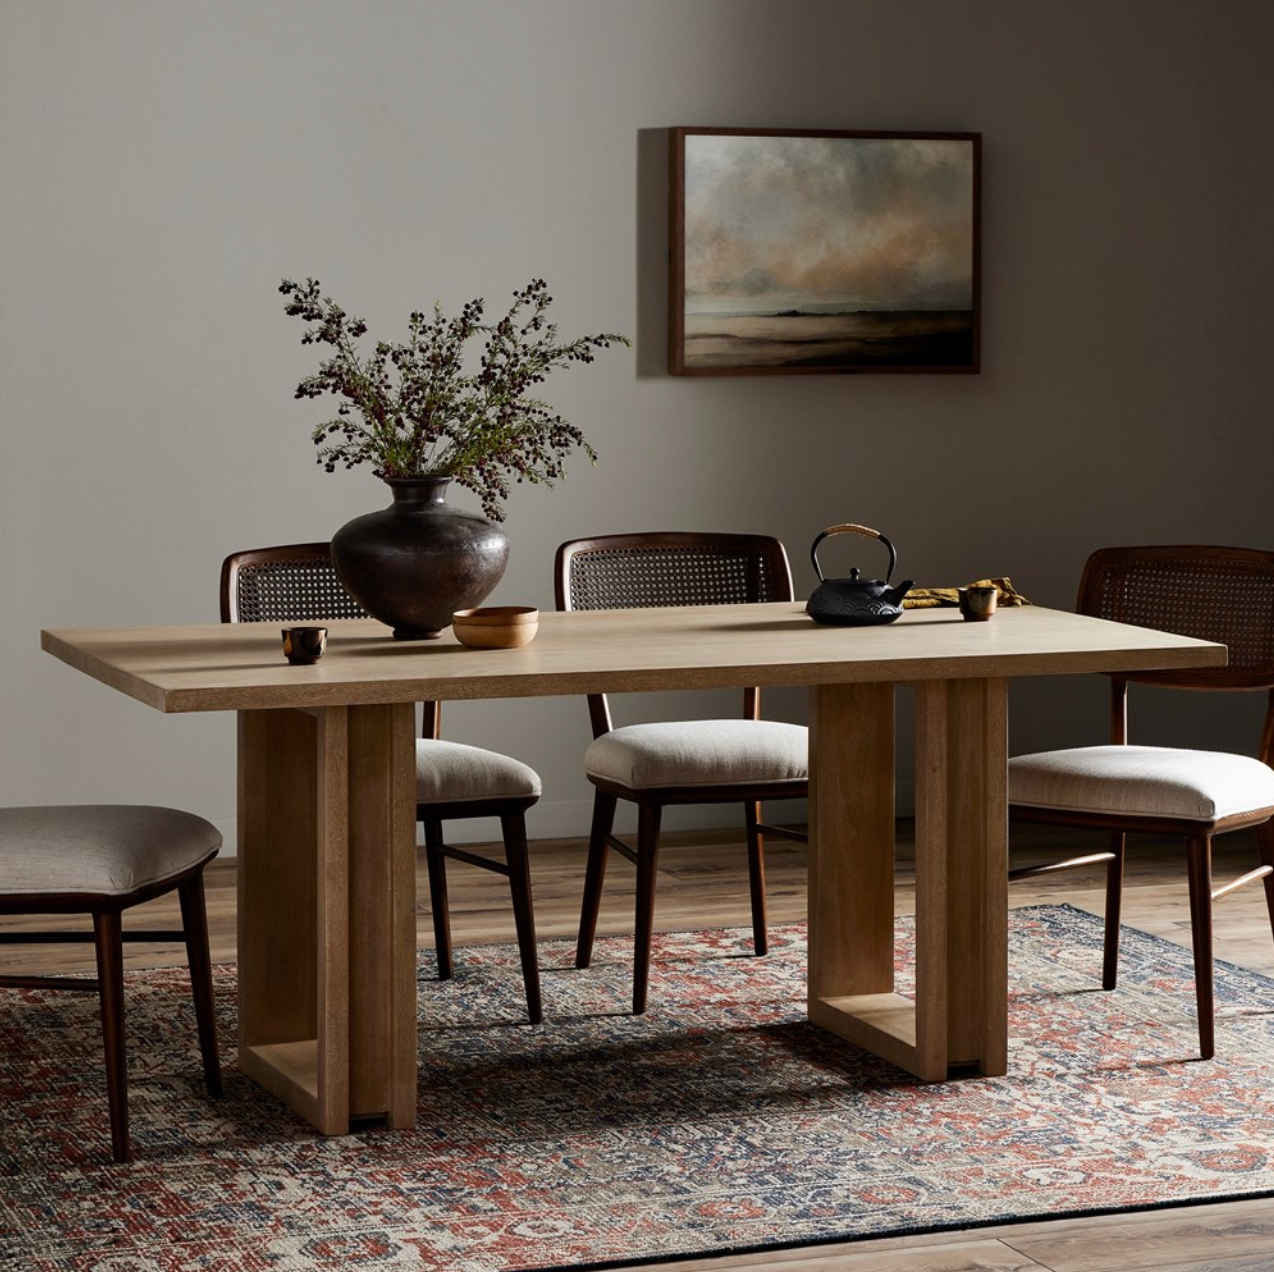 Tomaz Gaming Table, Furniture & Home Living, Furniture, Tables